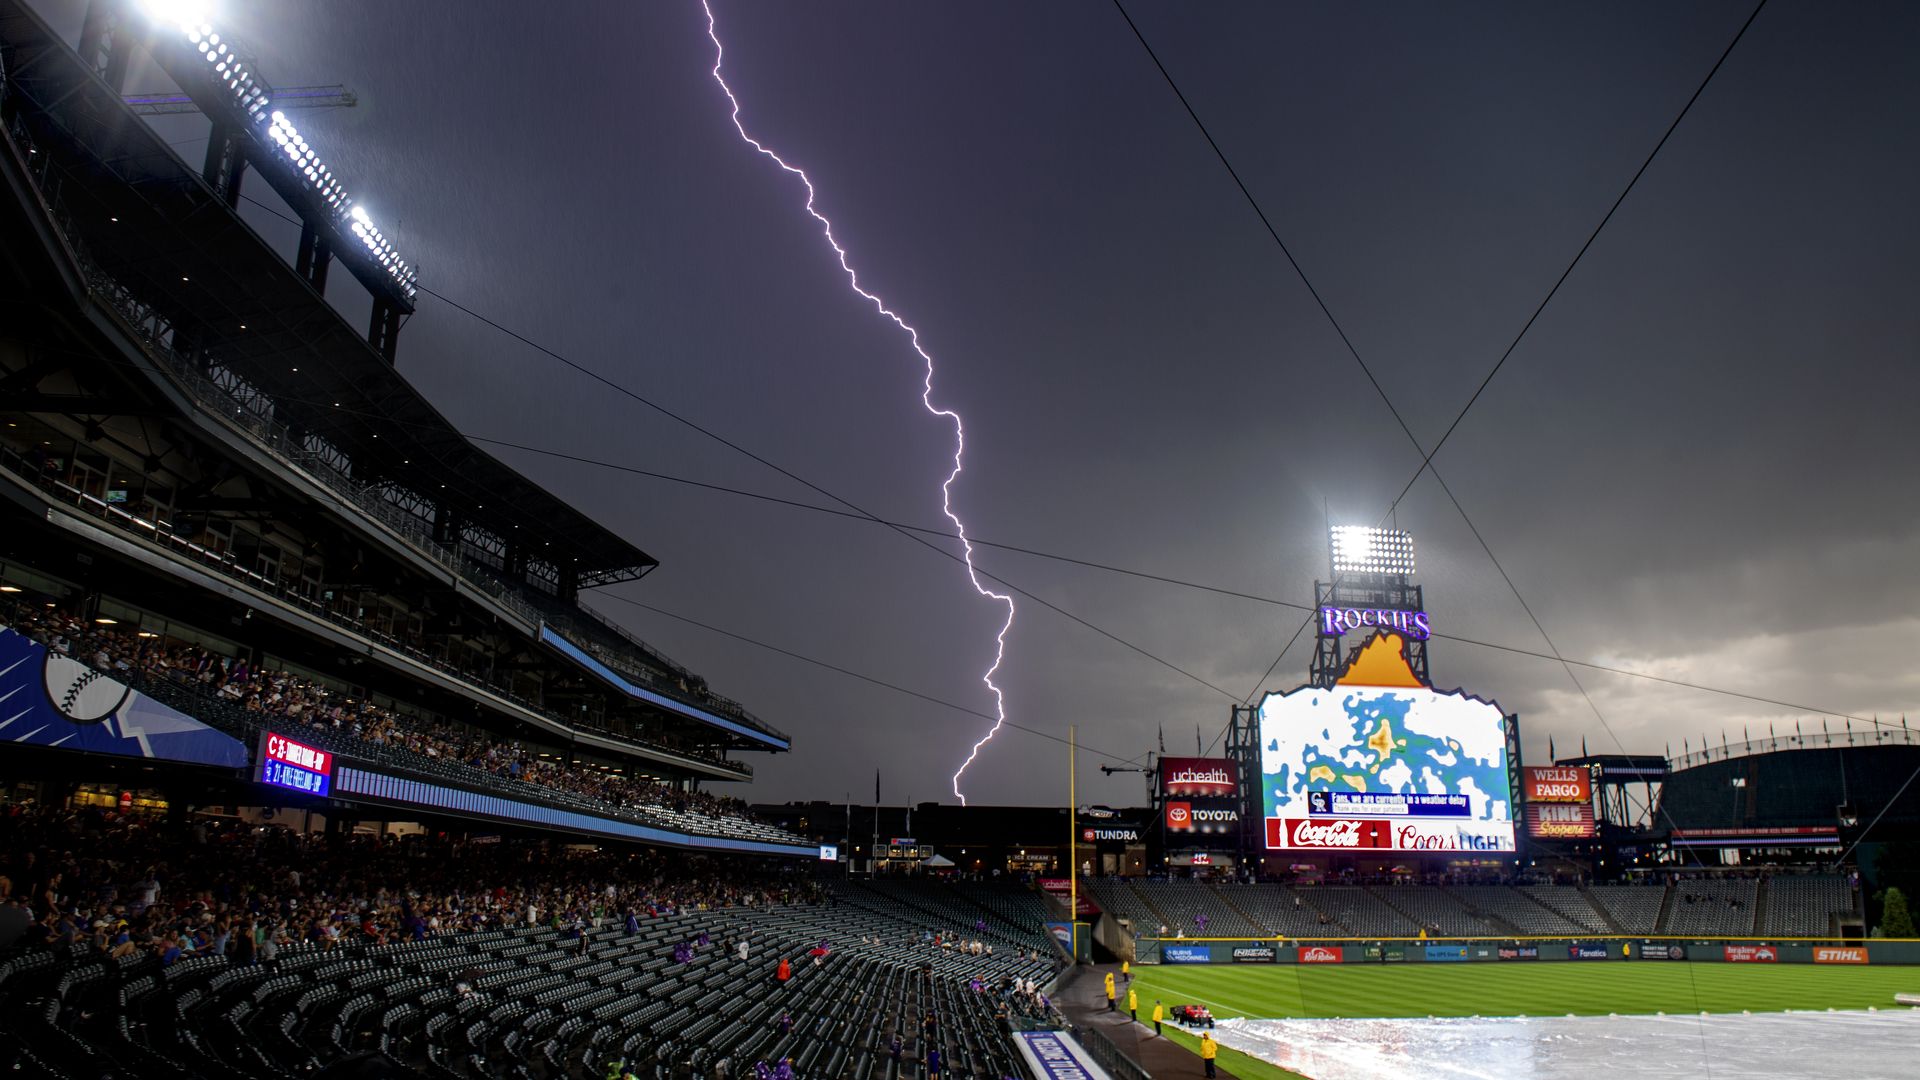 Lightning strikes behind Coors Field during a rain delayed game in July 2019. Photo: Julio Aguilar/Getty Images